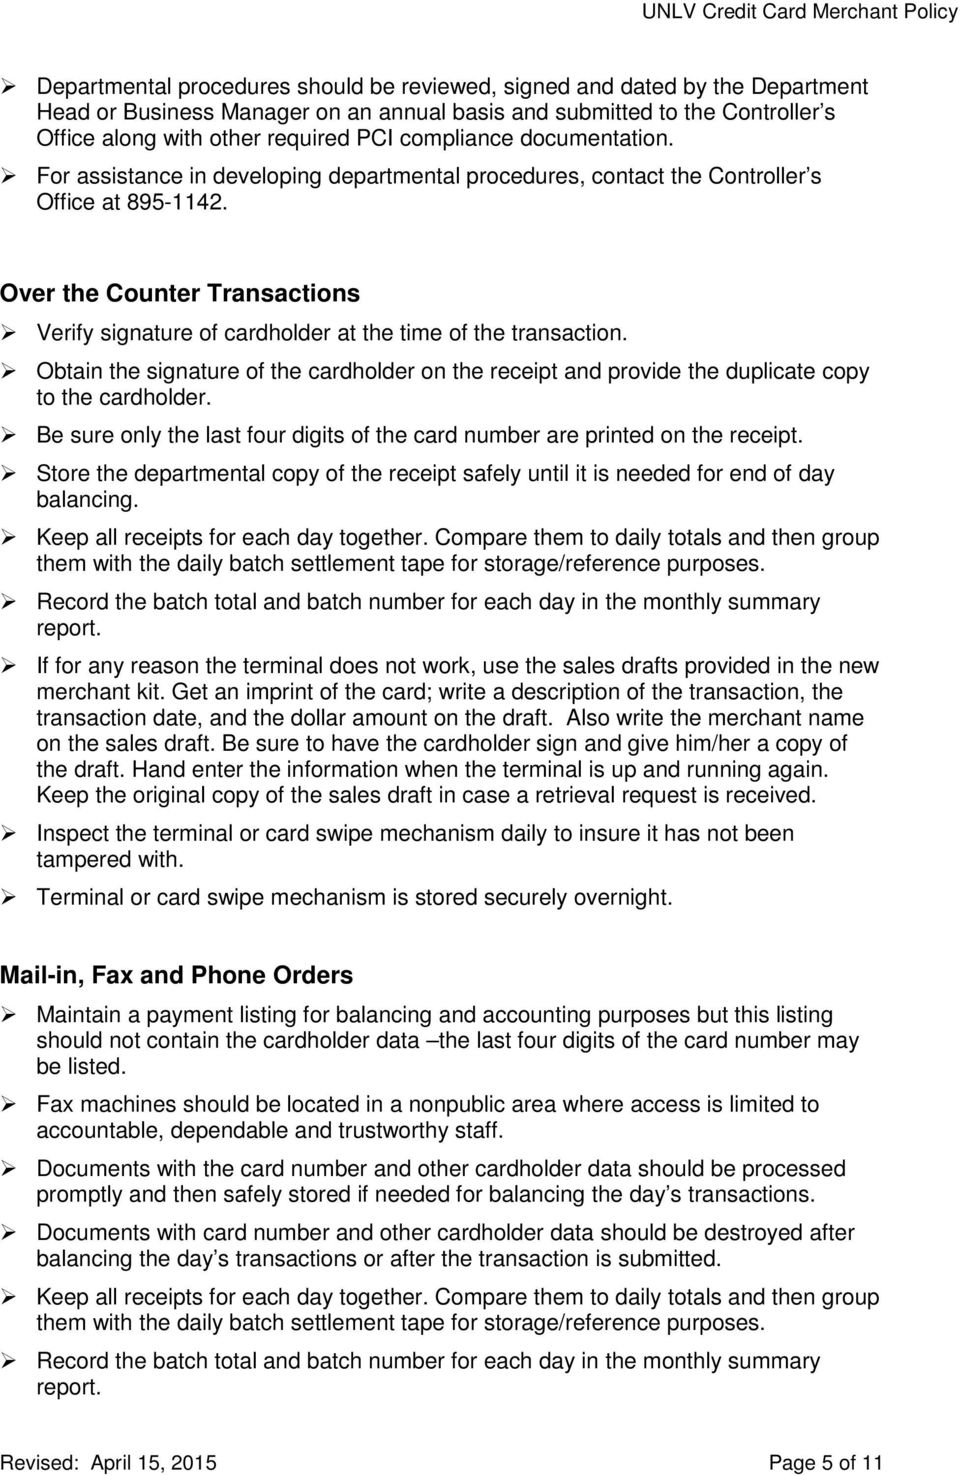 Over the Counter Transactions Verify signature of cardholder at the time of the transaction. Obtain the signature of the cardholder on the receipt and provide the duplicate copy to the cardholder.